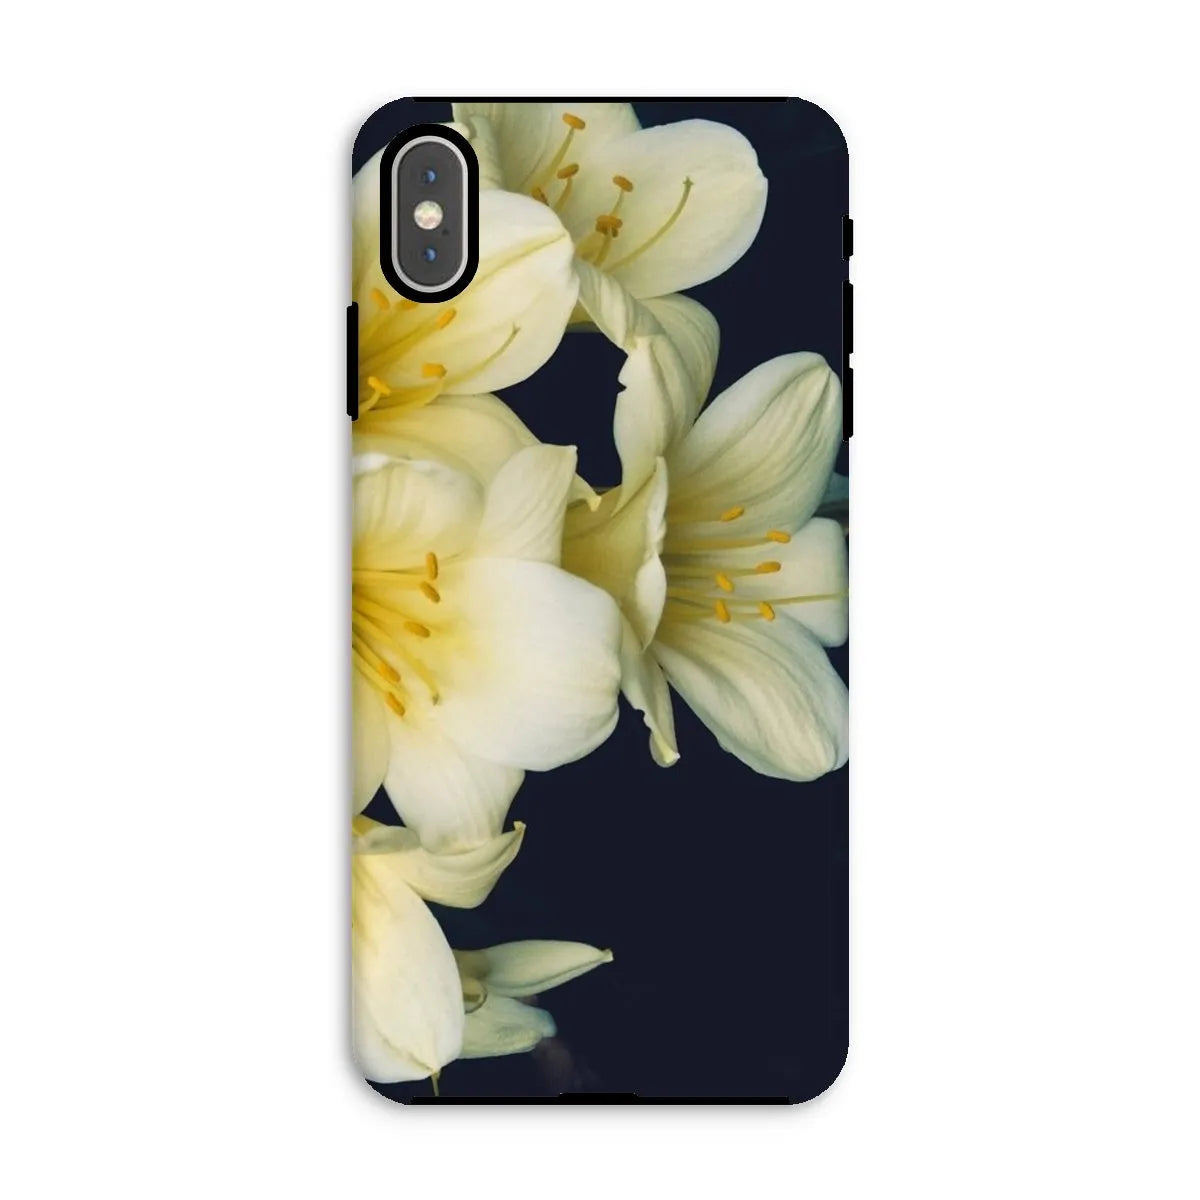 Flower Power Too Tough Phone Case - Iphone Xs Max / Matte - Mobile Phone Cases - Aesthetic Art